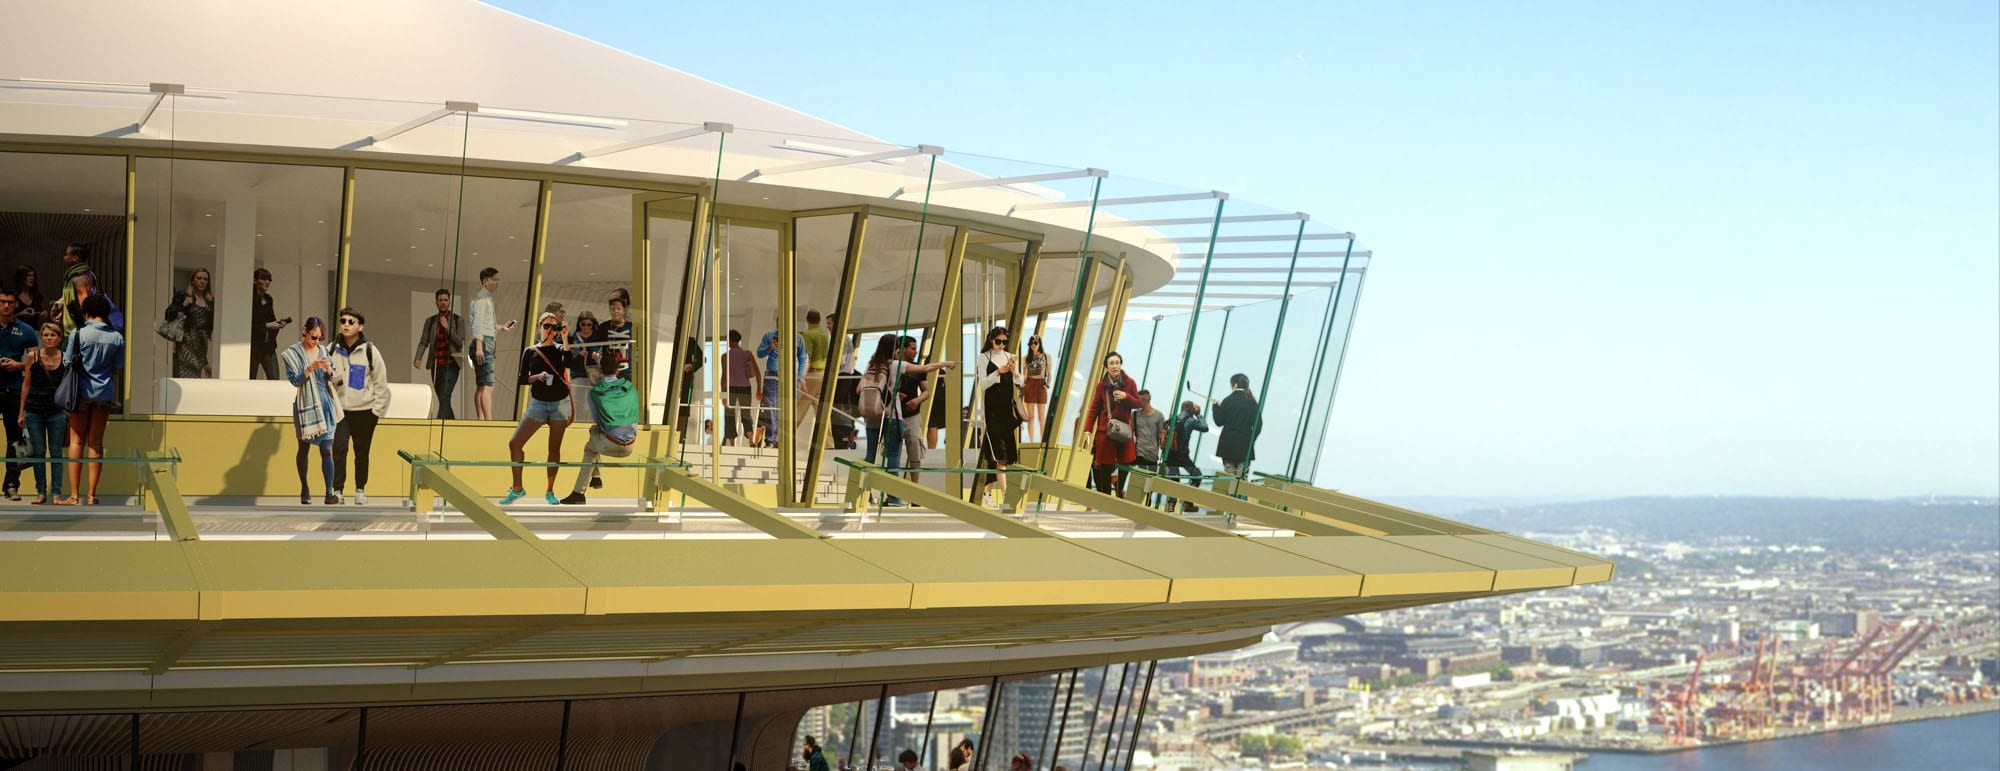 A rendering of the Space Needle's renovated observation deck, showing visitors gazing out toward Seattle from the new glass overlook.